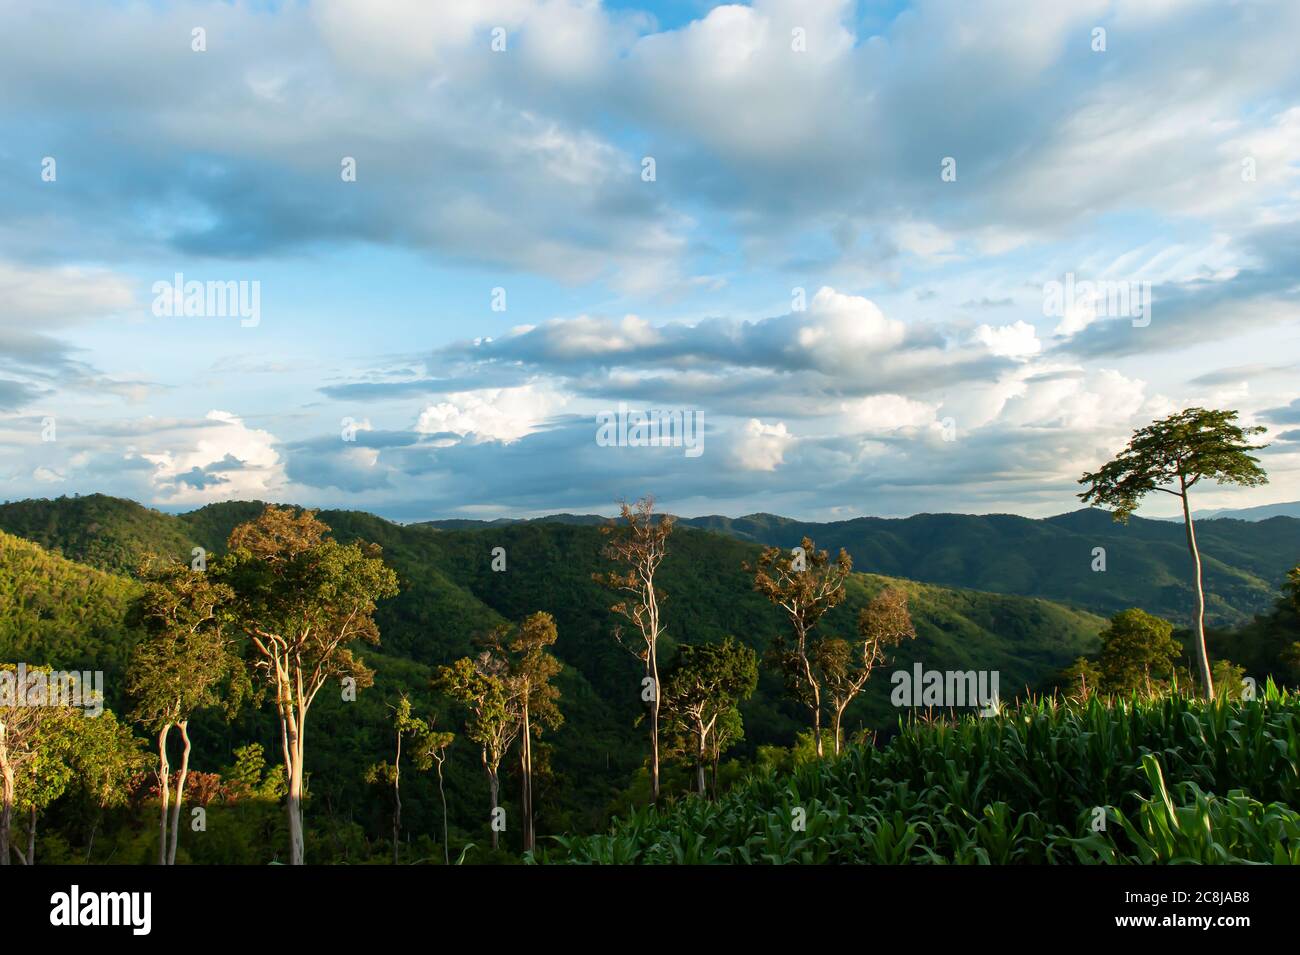 Landscape of young green corn terraces in a tropical rainforest. Environment concept. Stock Photo